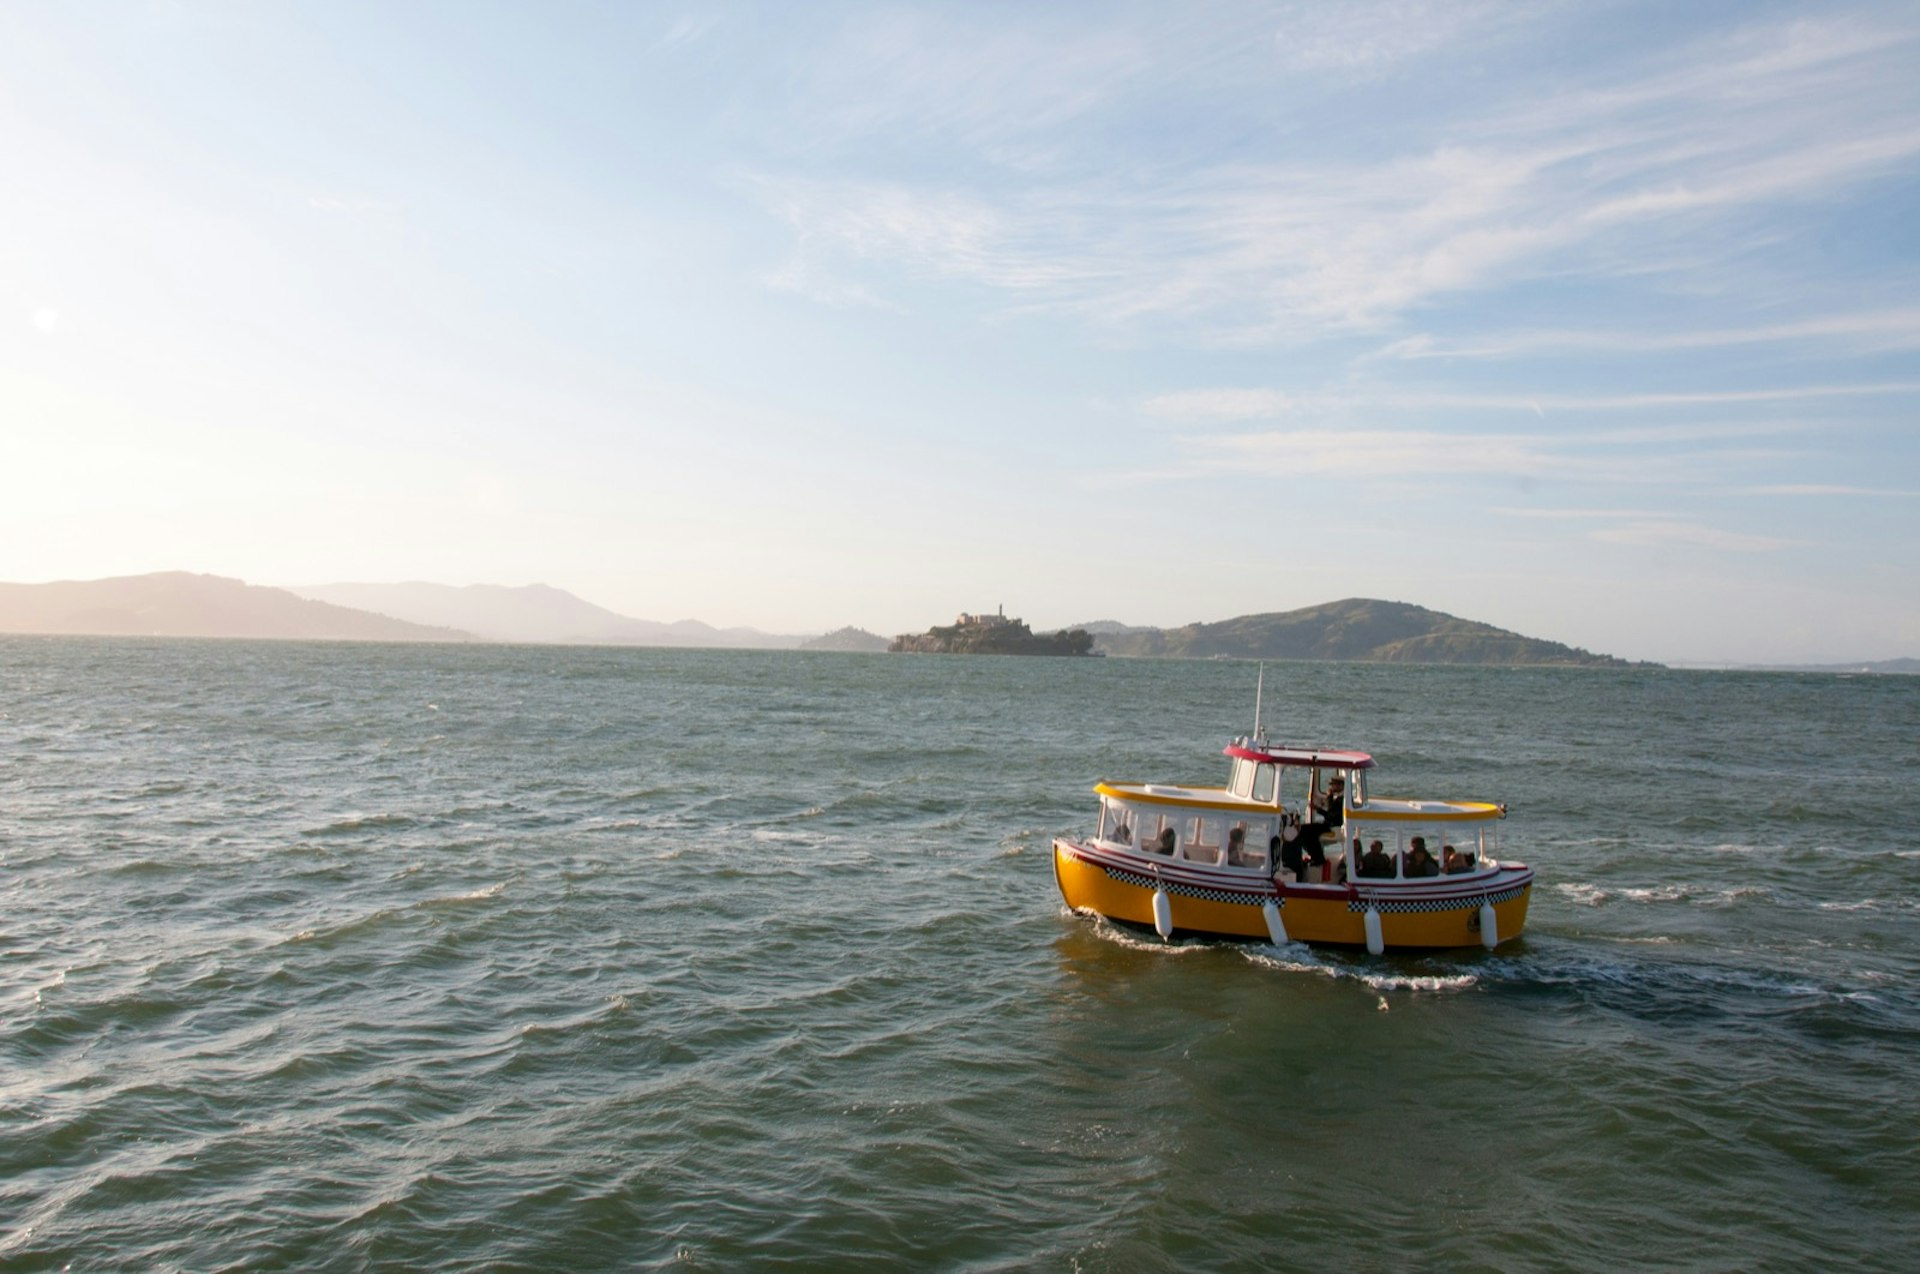 A boat cruises through the ocean towards a setting sun with hilly islands in the background. Weekend in San Francisco